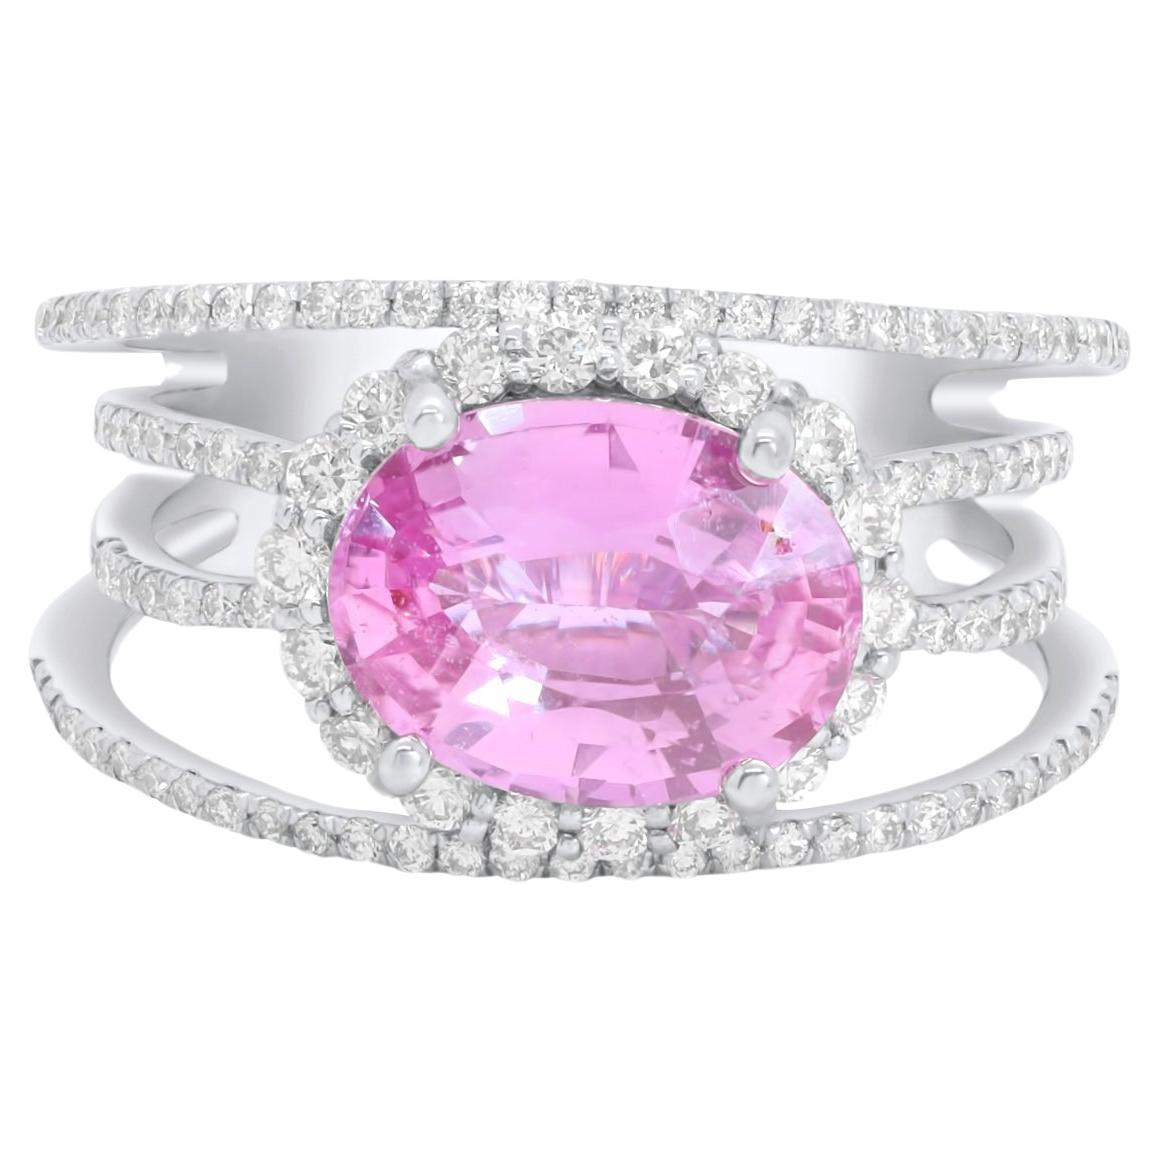 Diana M. 18 kt white gold  pink sapphire diamond ring featuring a 2.86 ct For Sale